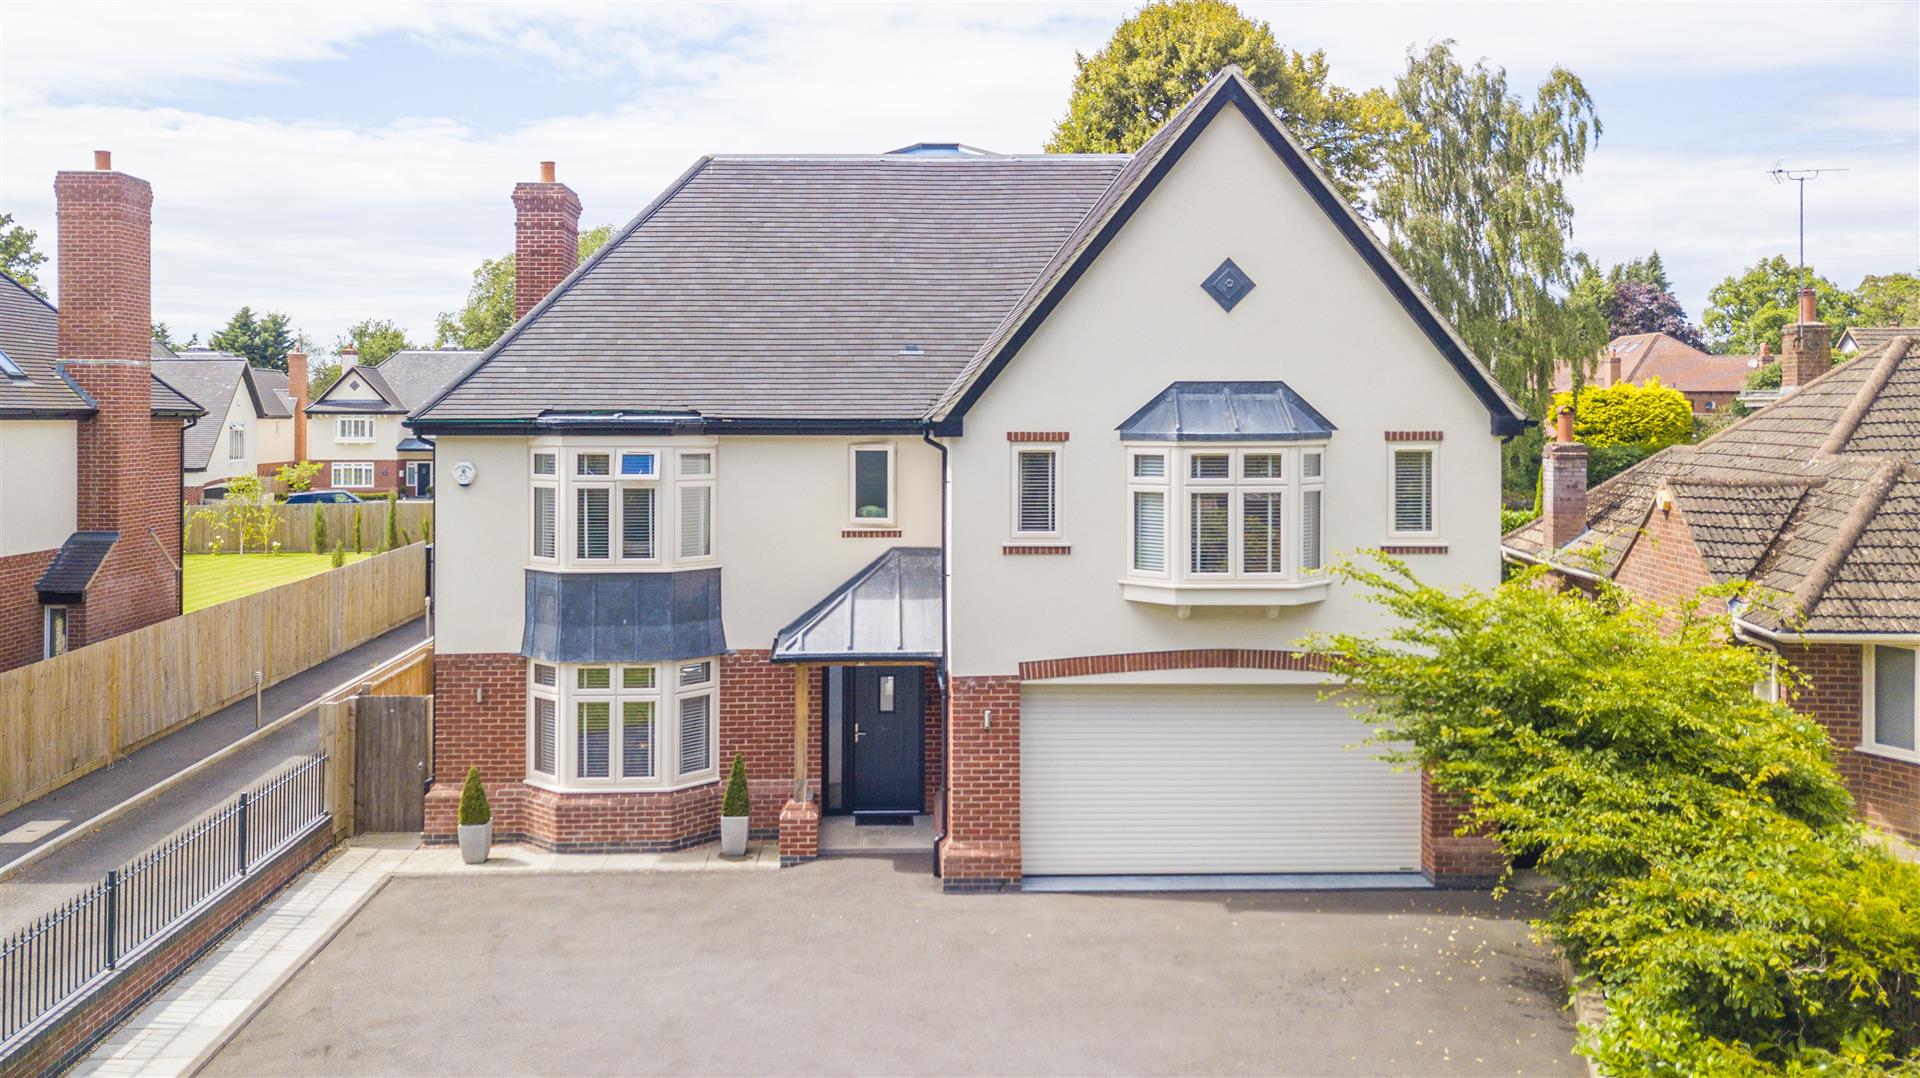 5 bed detached house for sale in Alderbrook Road, Solihull 0